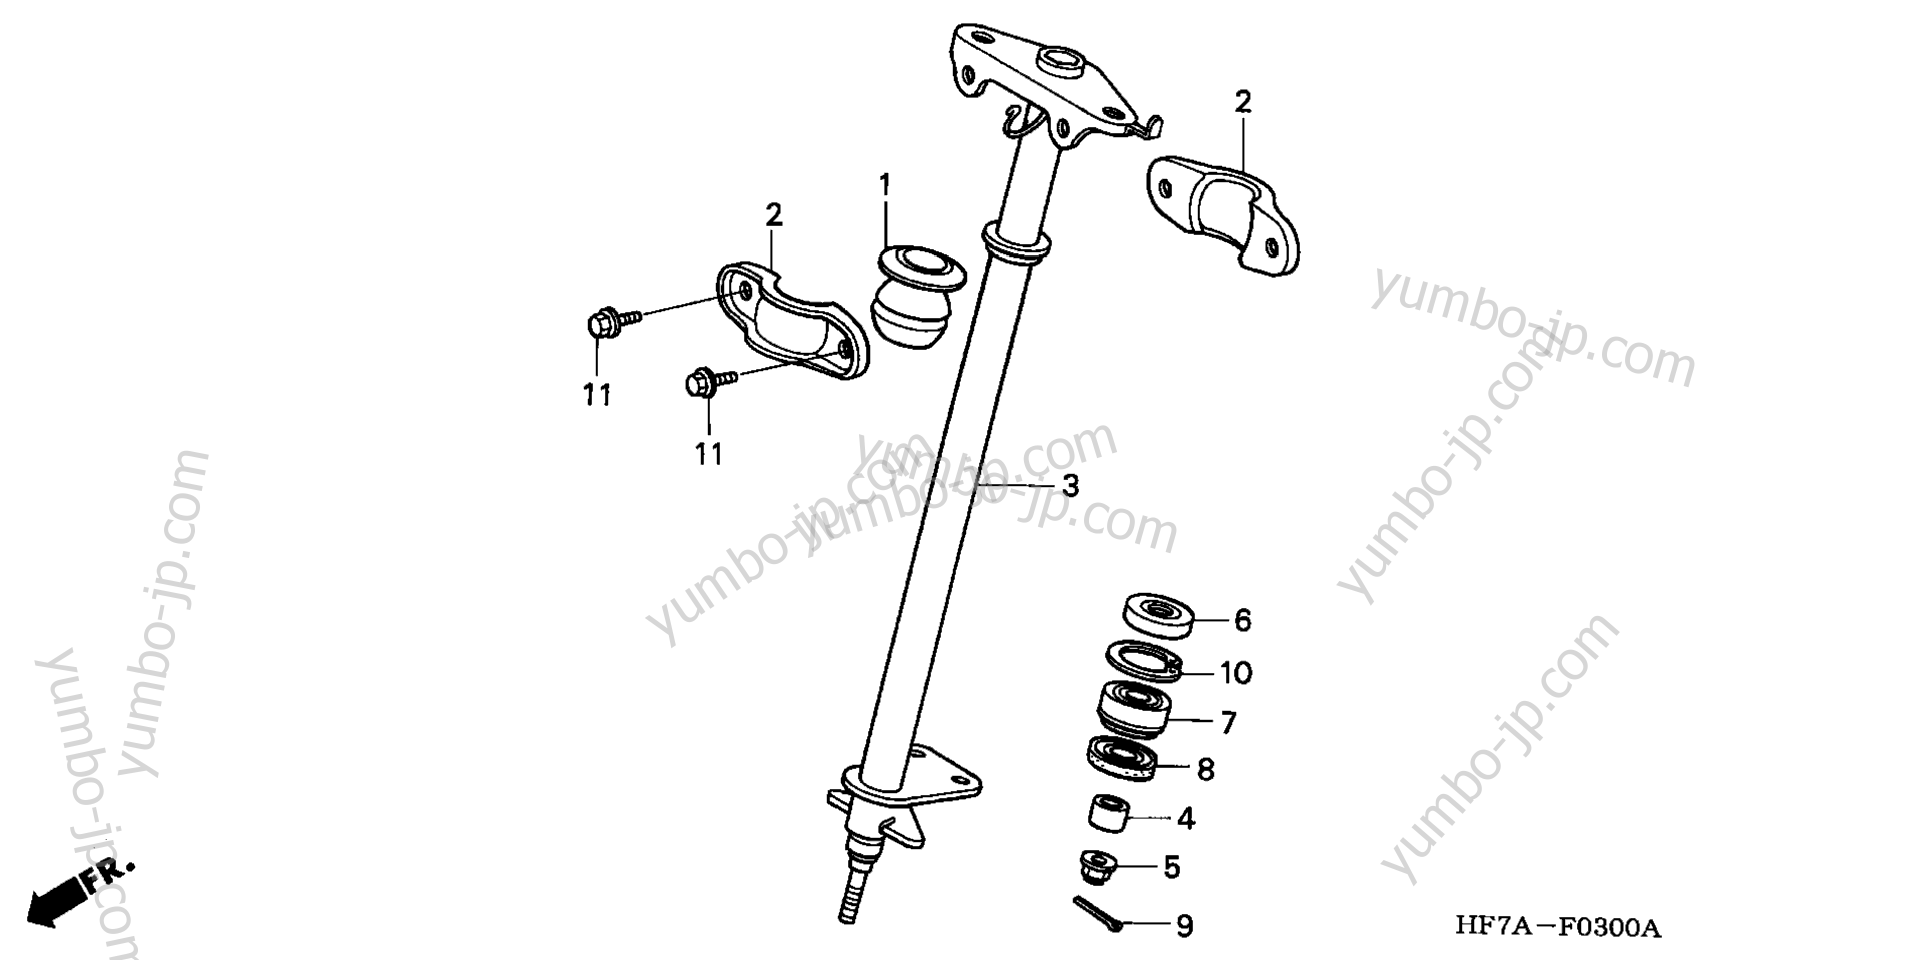 STEERING SHAFT for ATVs HONDA TRX90 A 2005 year